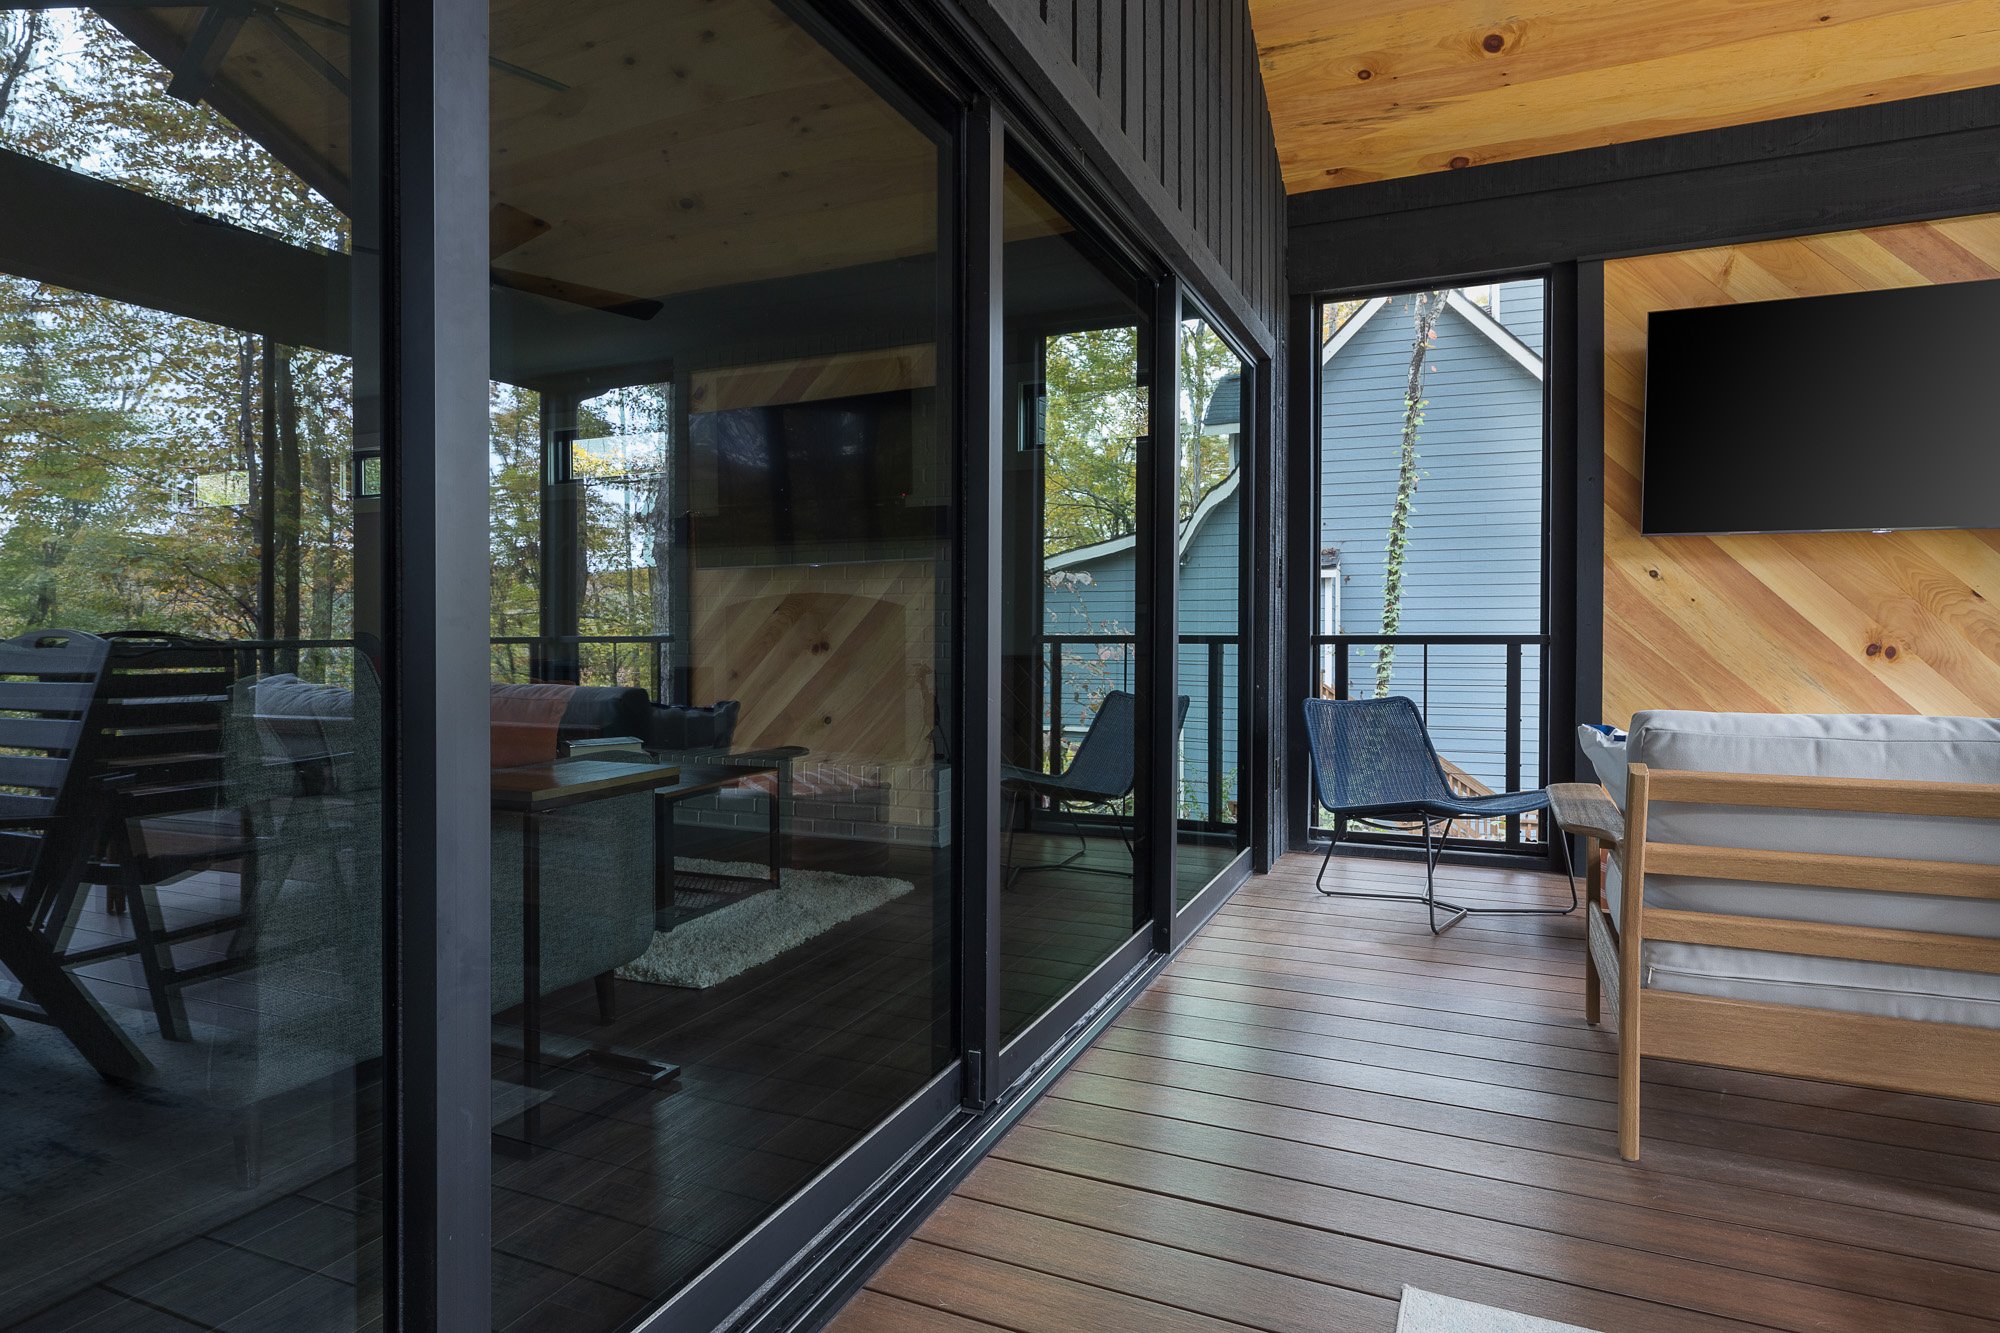 Screened-in porch with modern furniture and contrasting wood finishes, blending indoor and outdoor living.